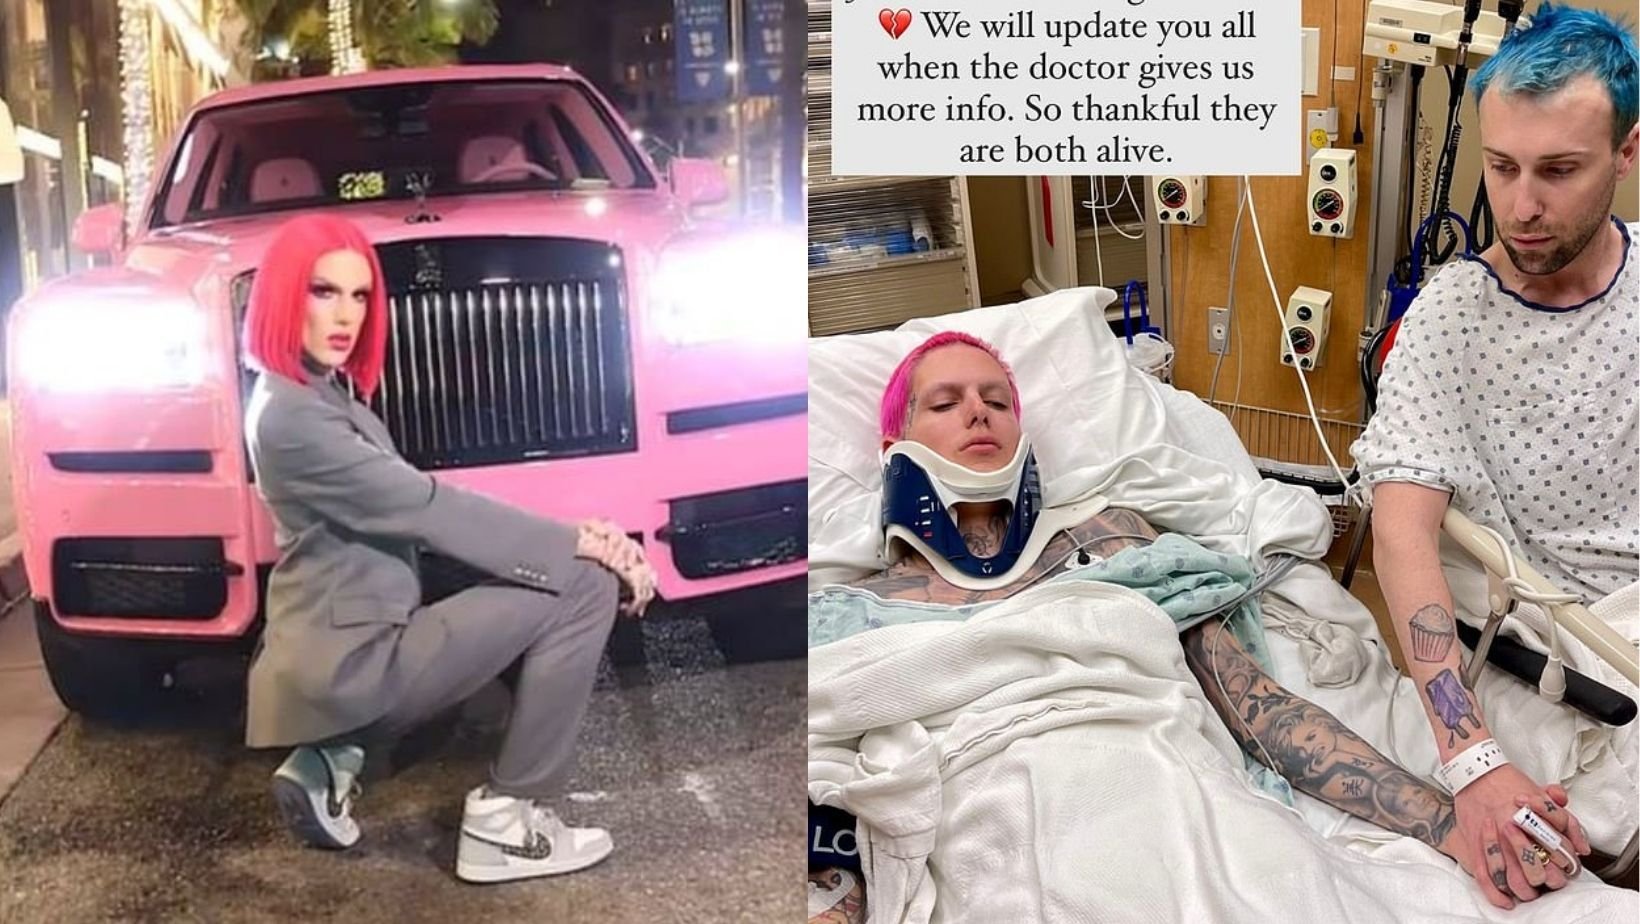 1 83.jpg?resize=1200,630 - YouTuber Jeffree Star Is Hospitalised After His Pink Rolls Royce Hits Black Ice In ‘Severe Car Accident’